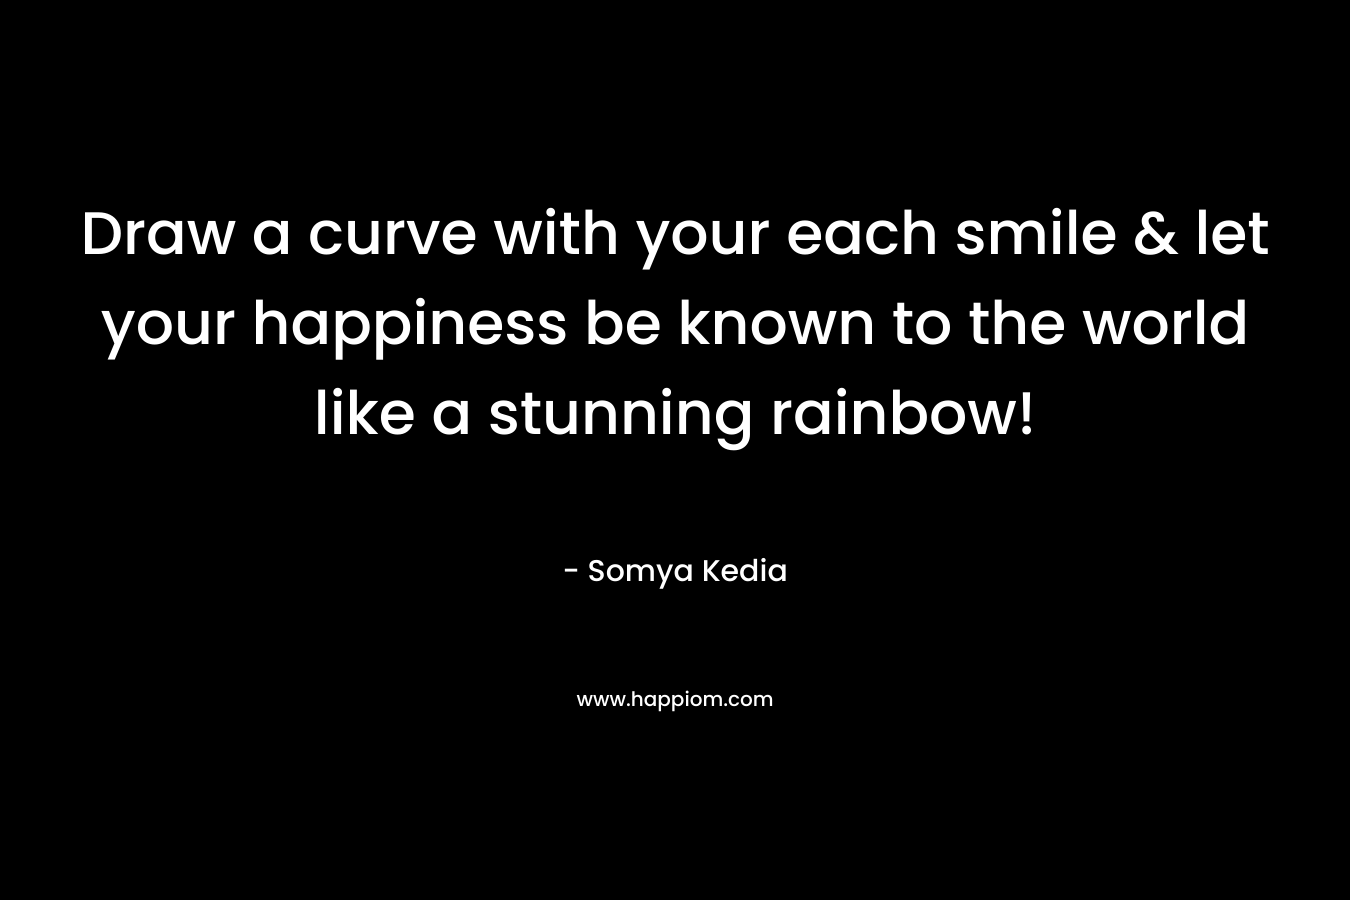 Draw a curve with your each smile & let your happiness be known to the world like a stunning rainbow! – Somya Kedia